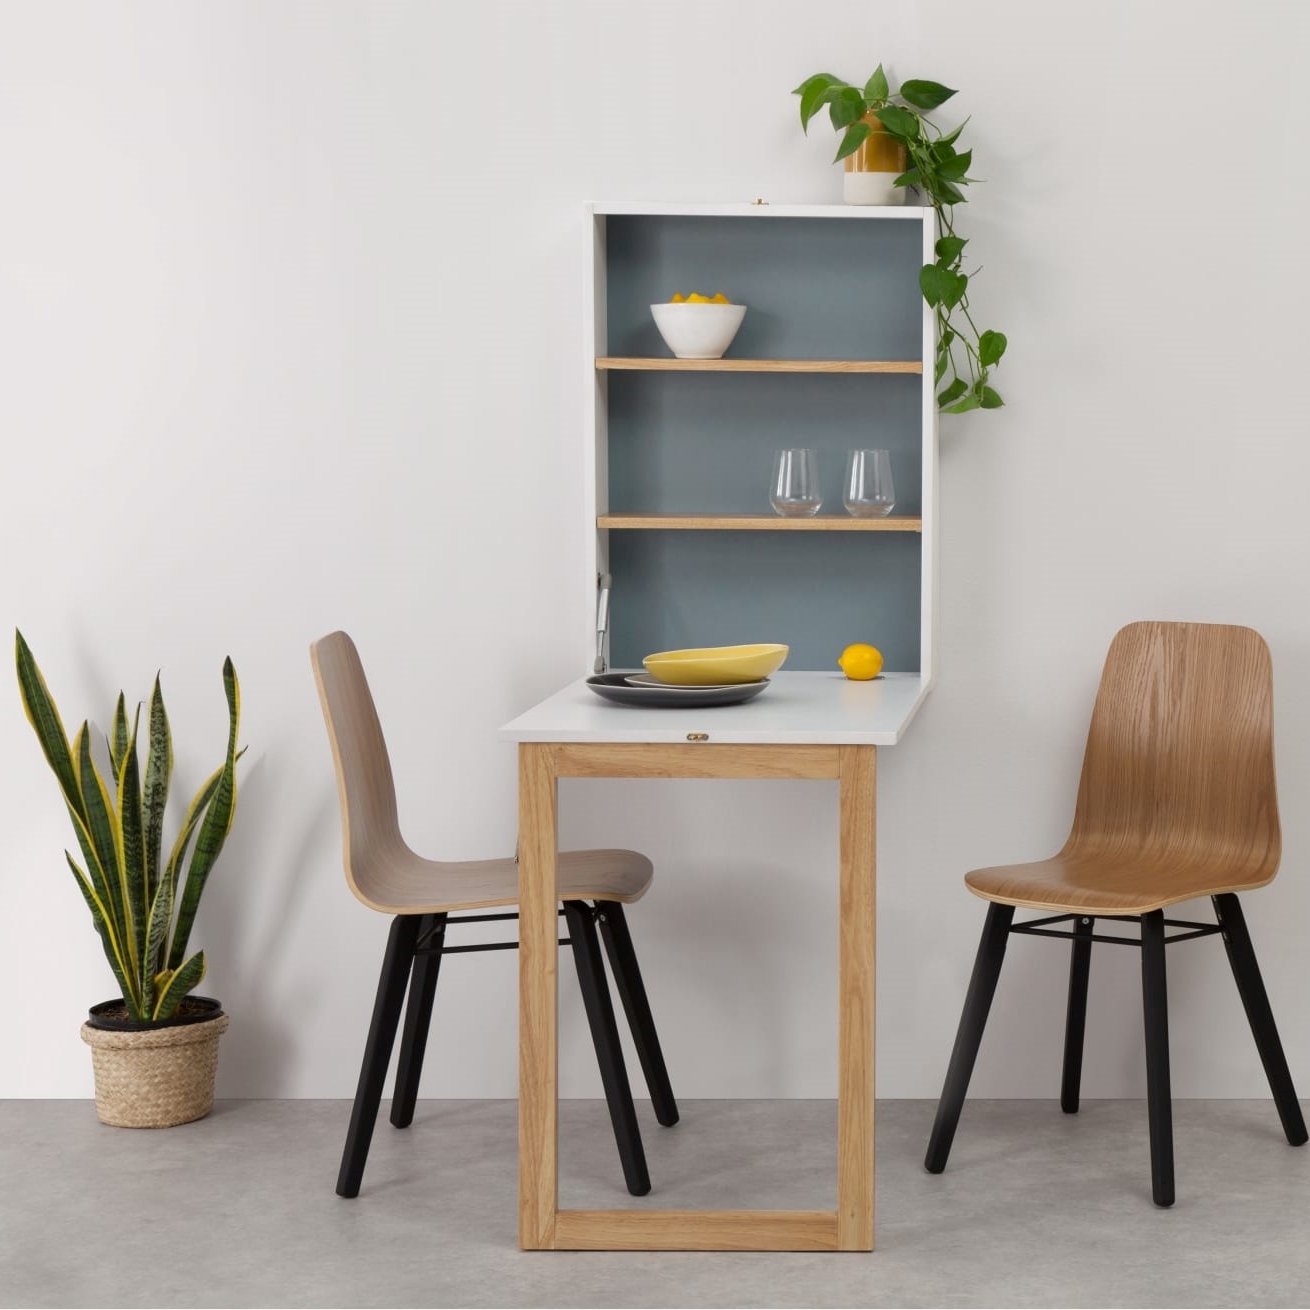 WALL-MOUNTED FOLD-DOWN TABLE